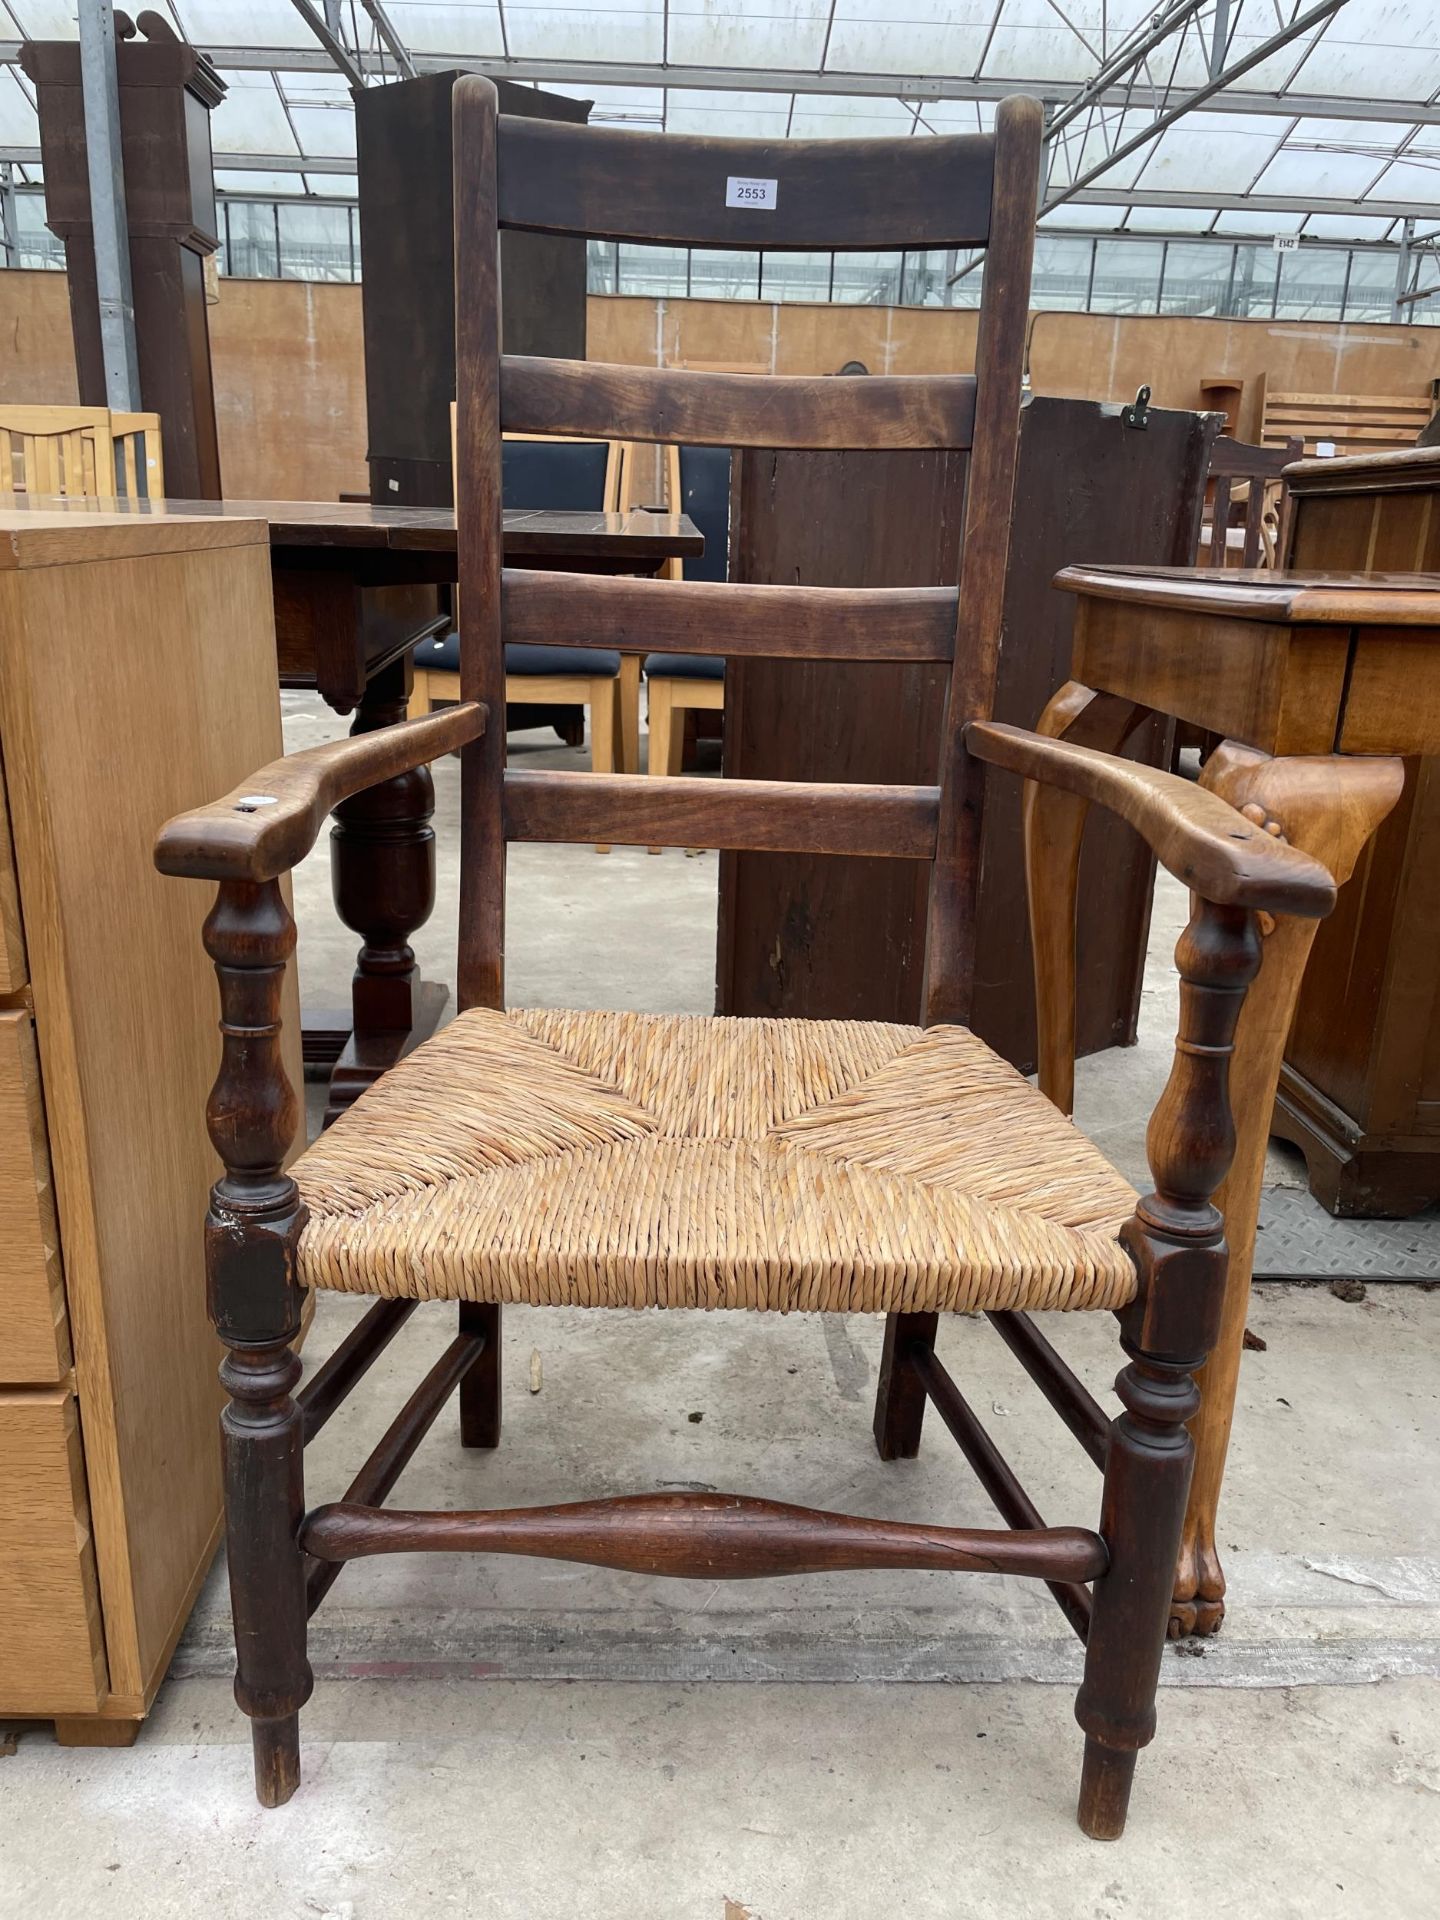 A 19TH CENTURY LADDERBACK ELBOW CHAIR WITH RUSH SEAT - Image 2 of 4